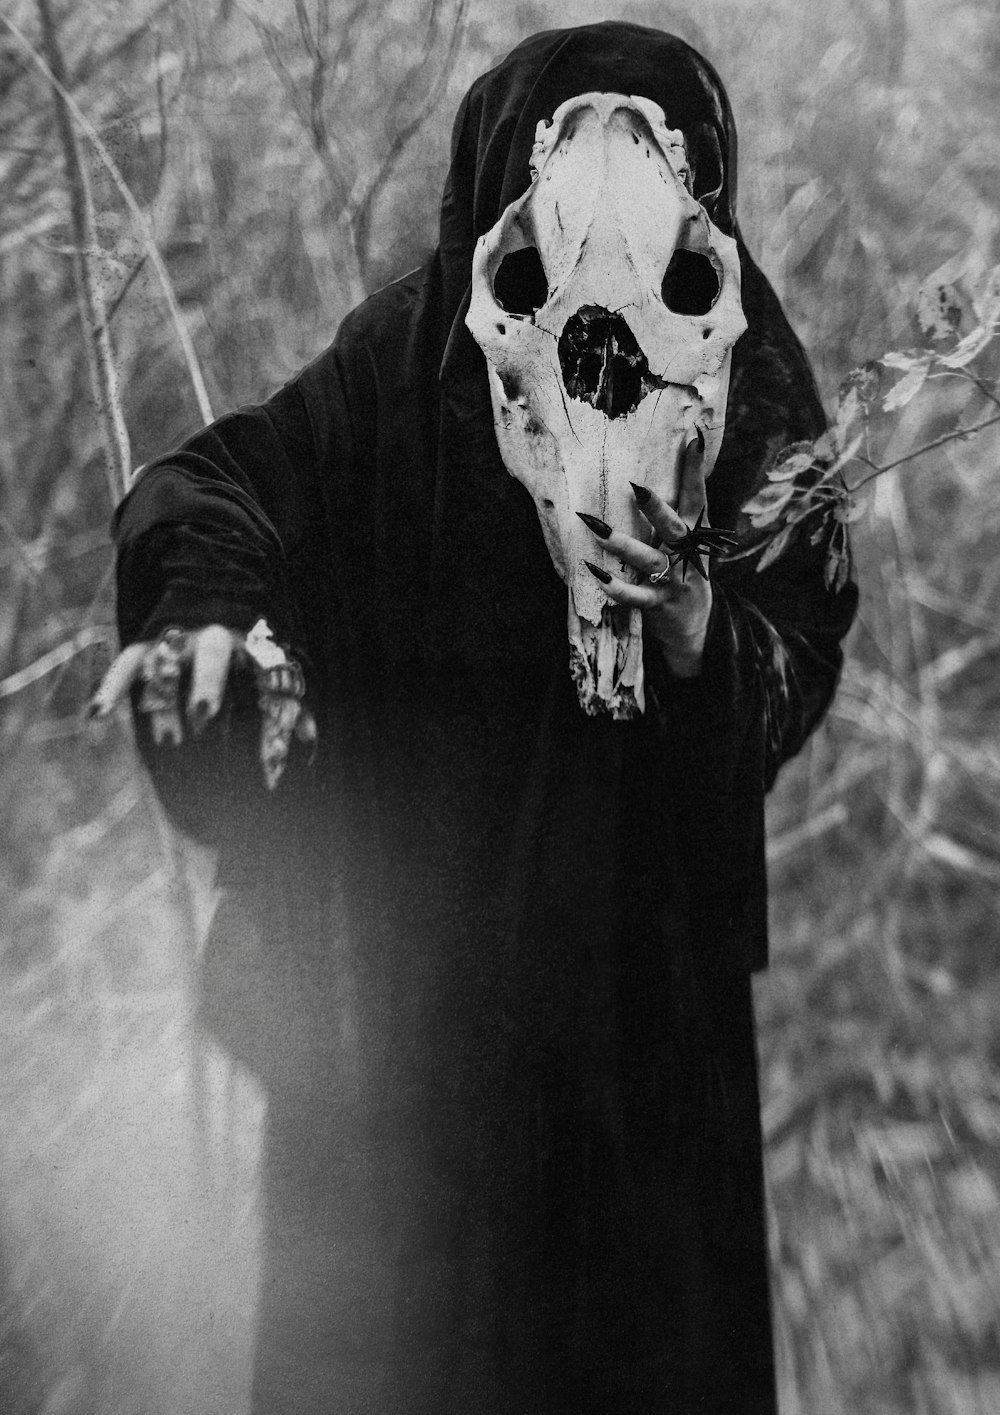 person in black and white skull mask